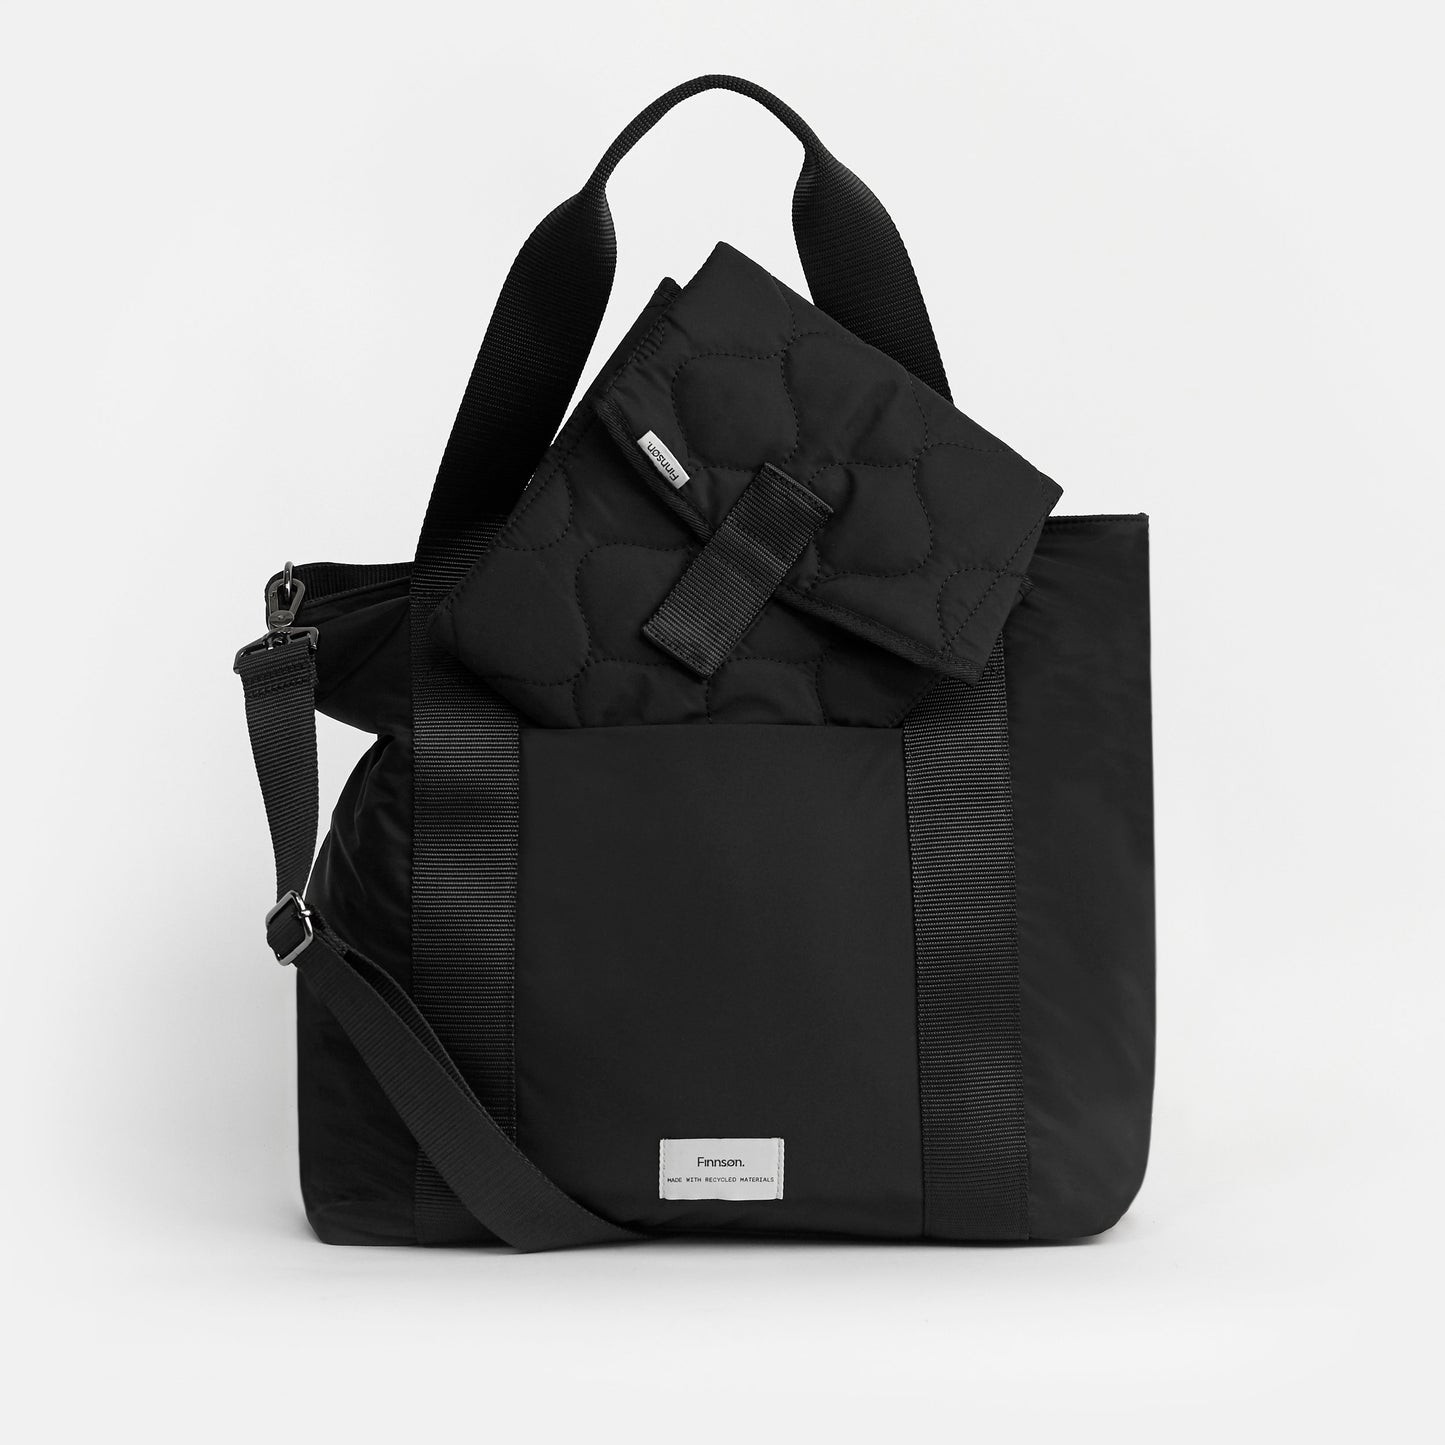 Finnsøn SELBY Eco Changing Bag - Black